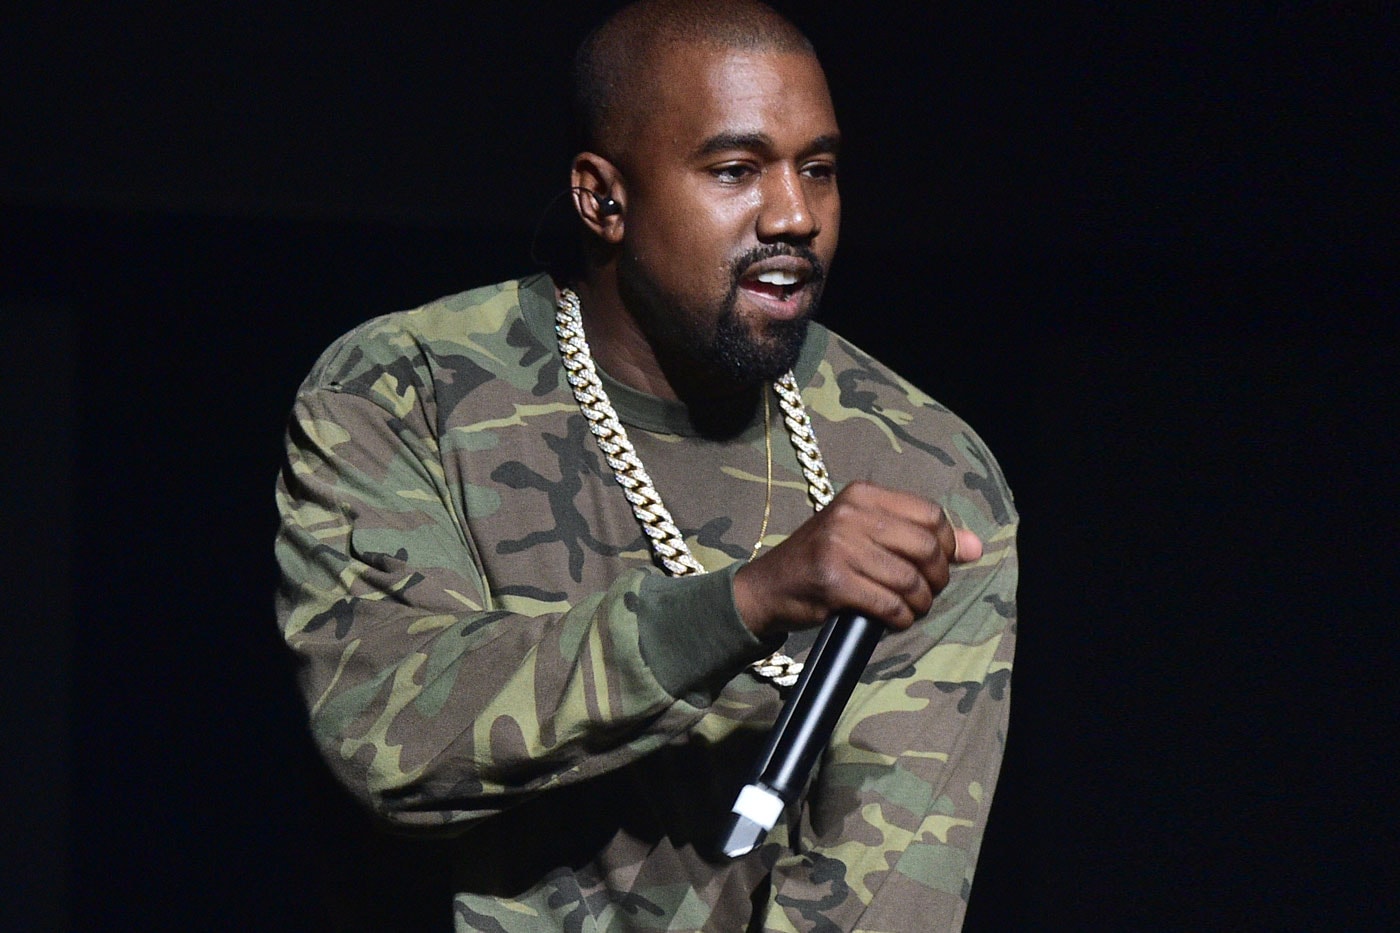 Kanye West To Perform SWISH Songs At DNC Fundraiser?